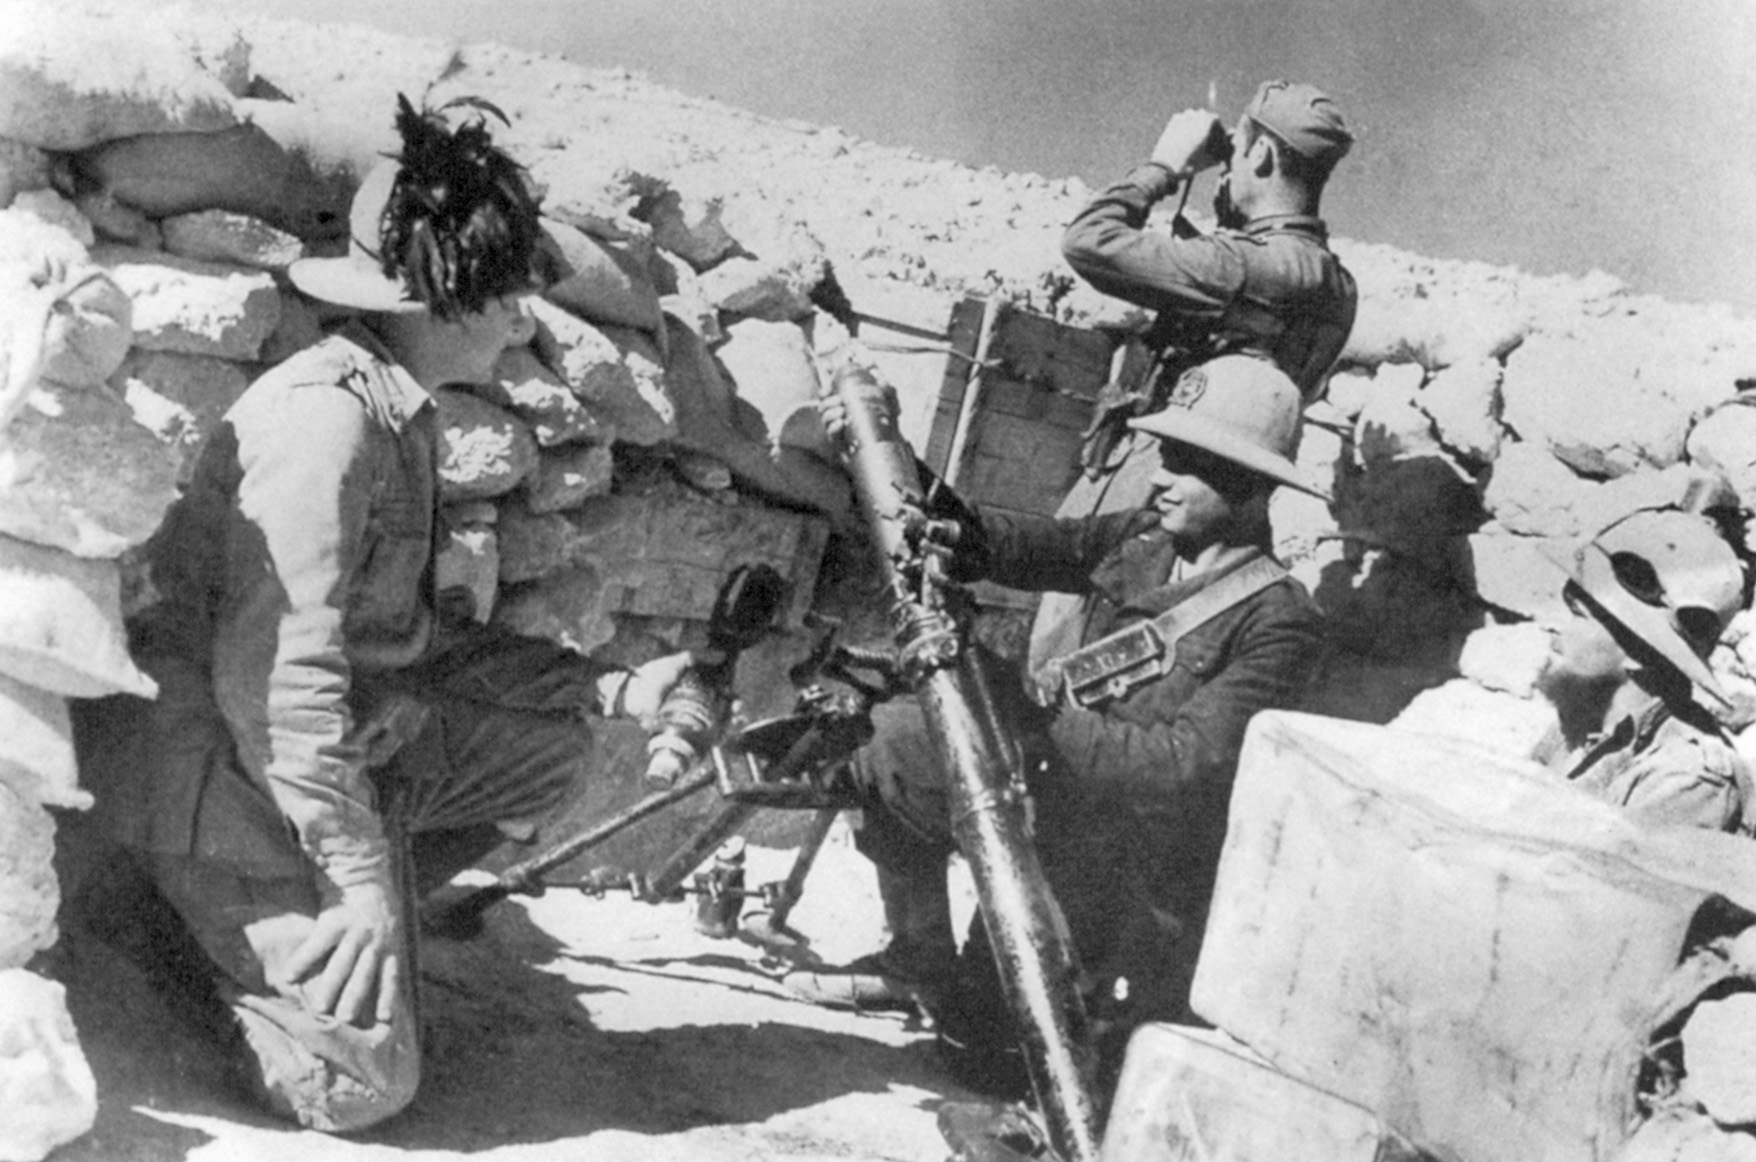 Italian forces in North Africa used a hodgepodge of weaponry, including guns that were handed over to Italy in payment of reparations after WWI. Here, members of a Bersaglieri regiment are firing a British-made mortar.